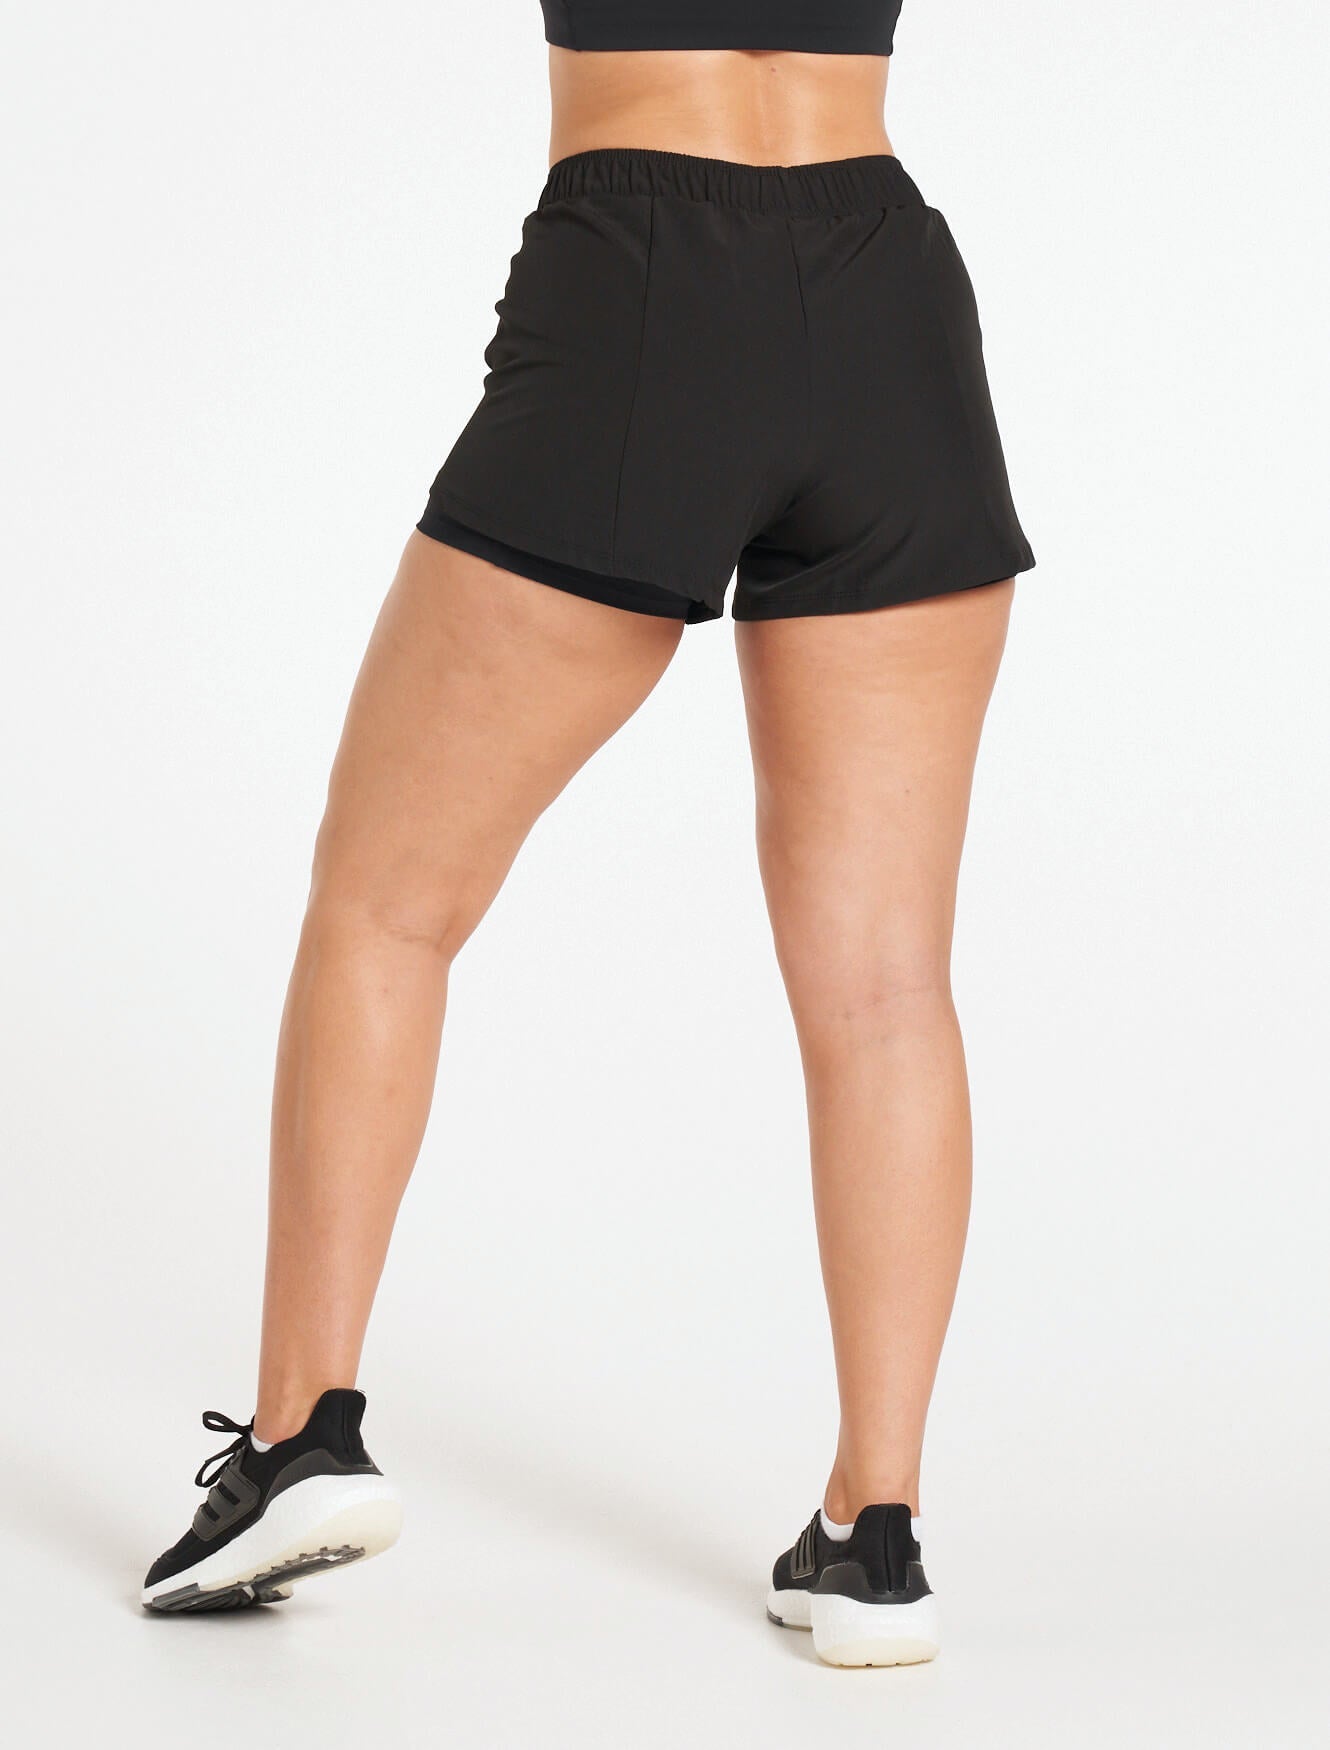 Pace Running Shorts / Blackout Pursue Fitness 3